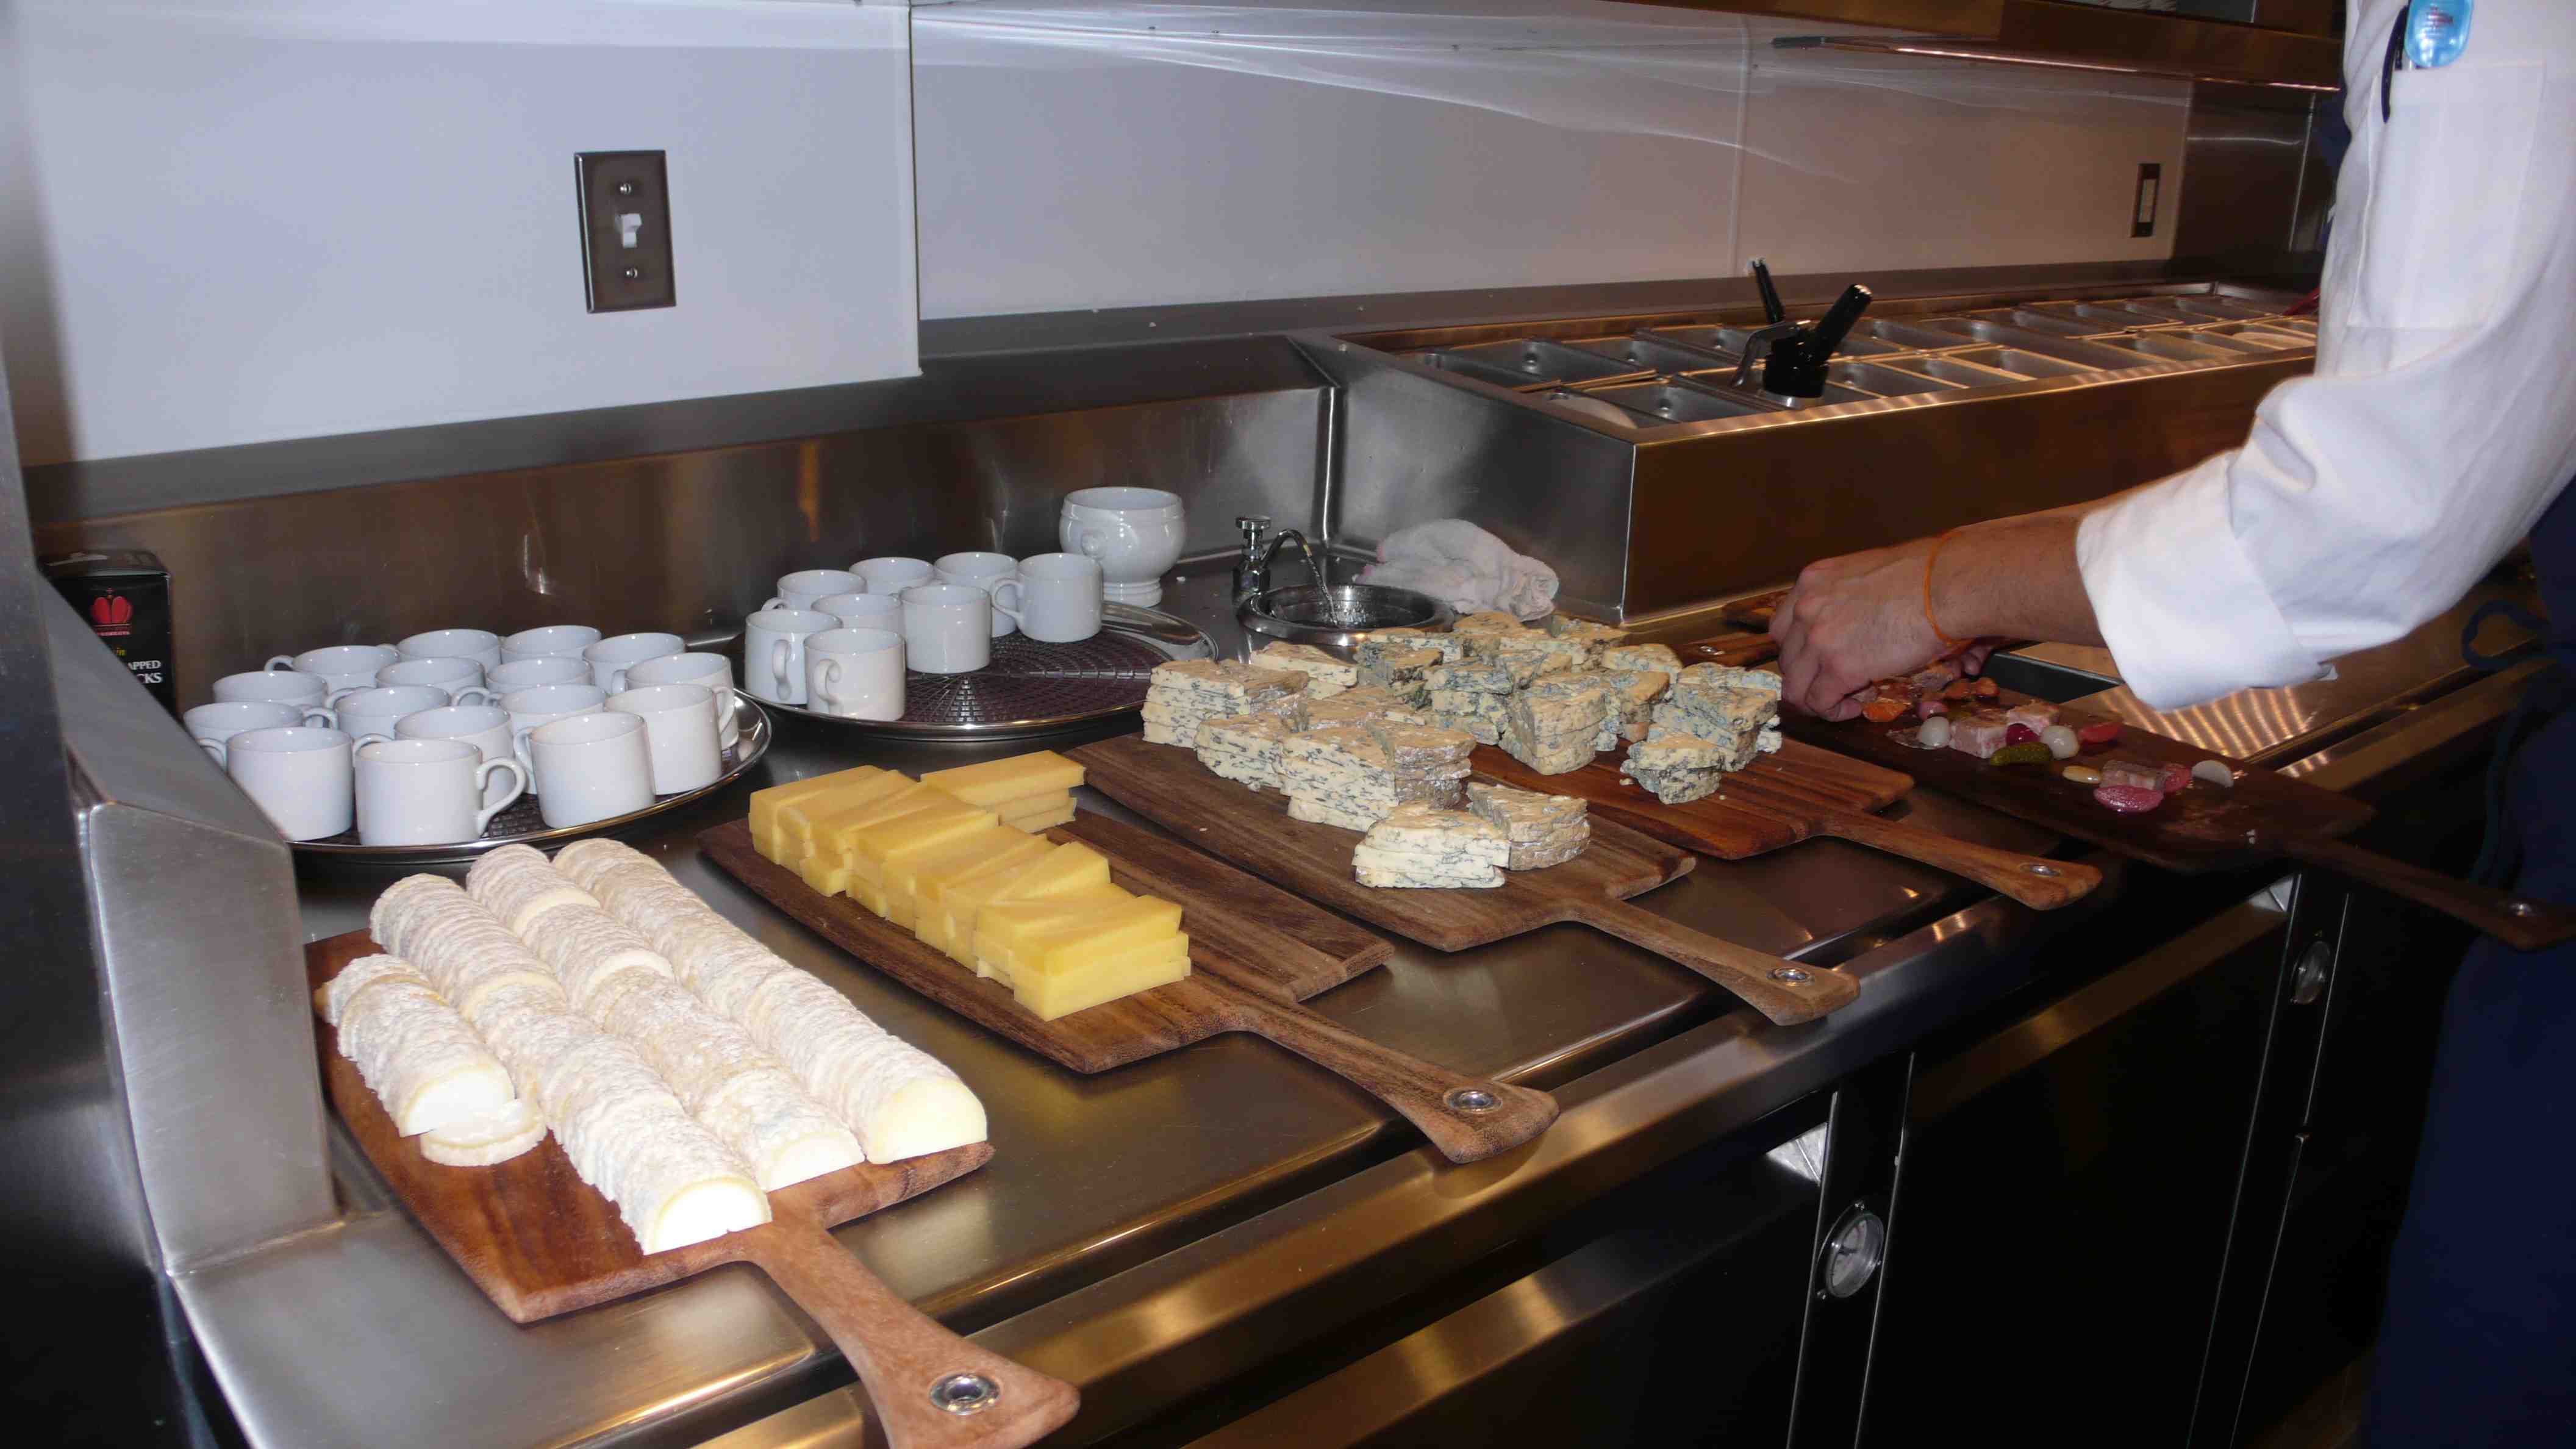 Plating cheeses in the kitchen